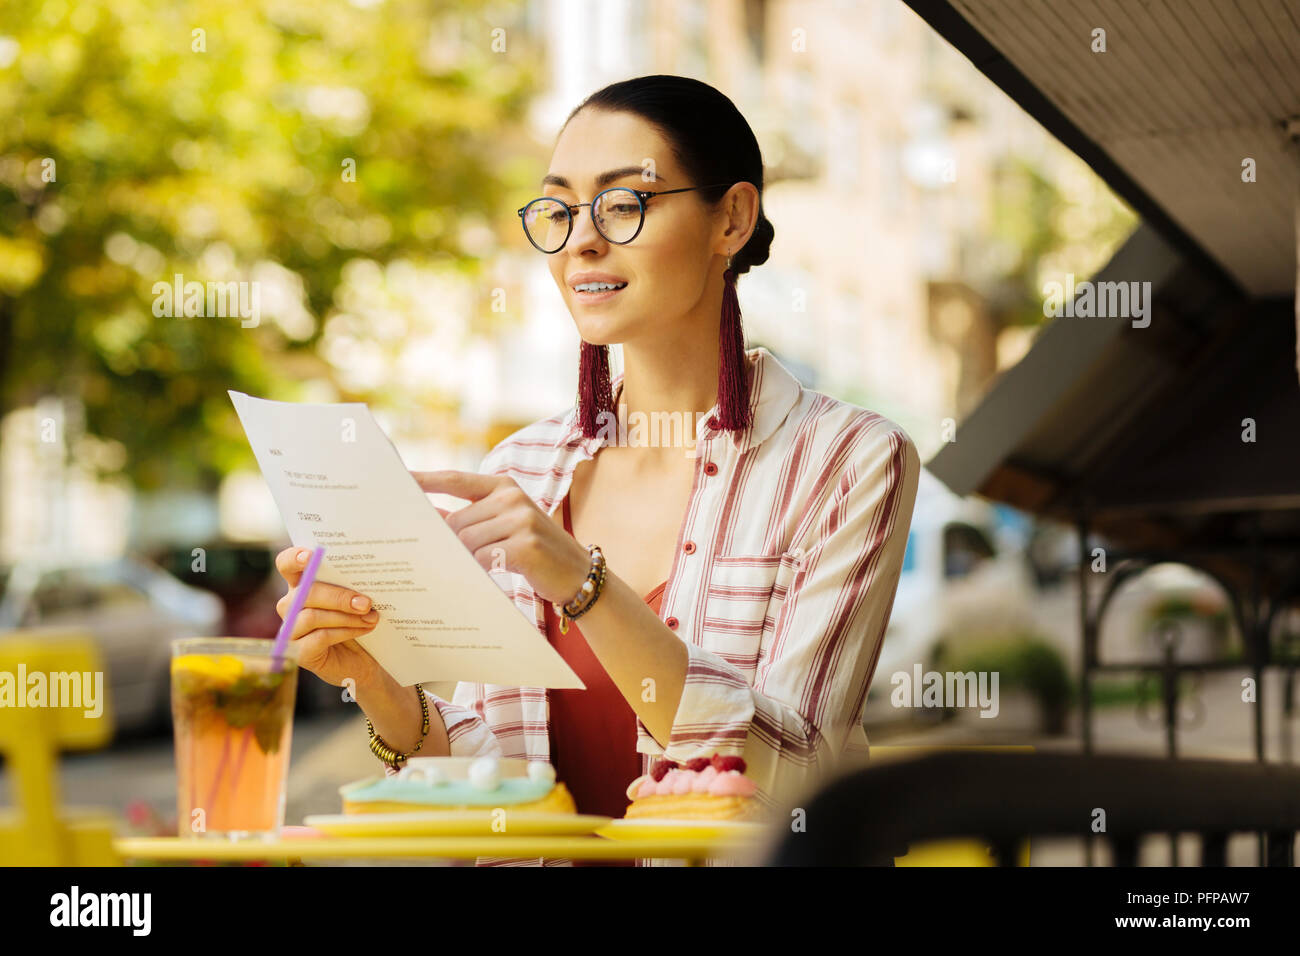 Young woman smiling and pointing to the meals in a menu Stock Photo